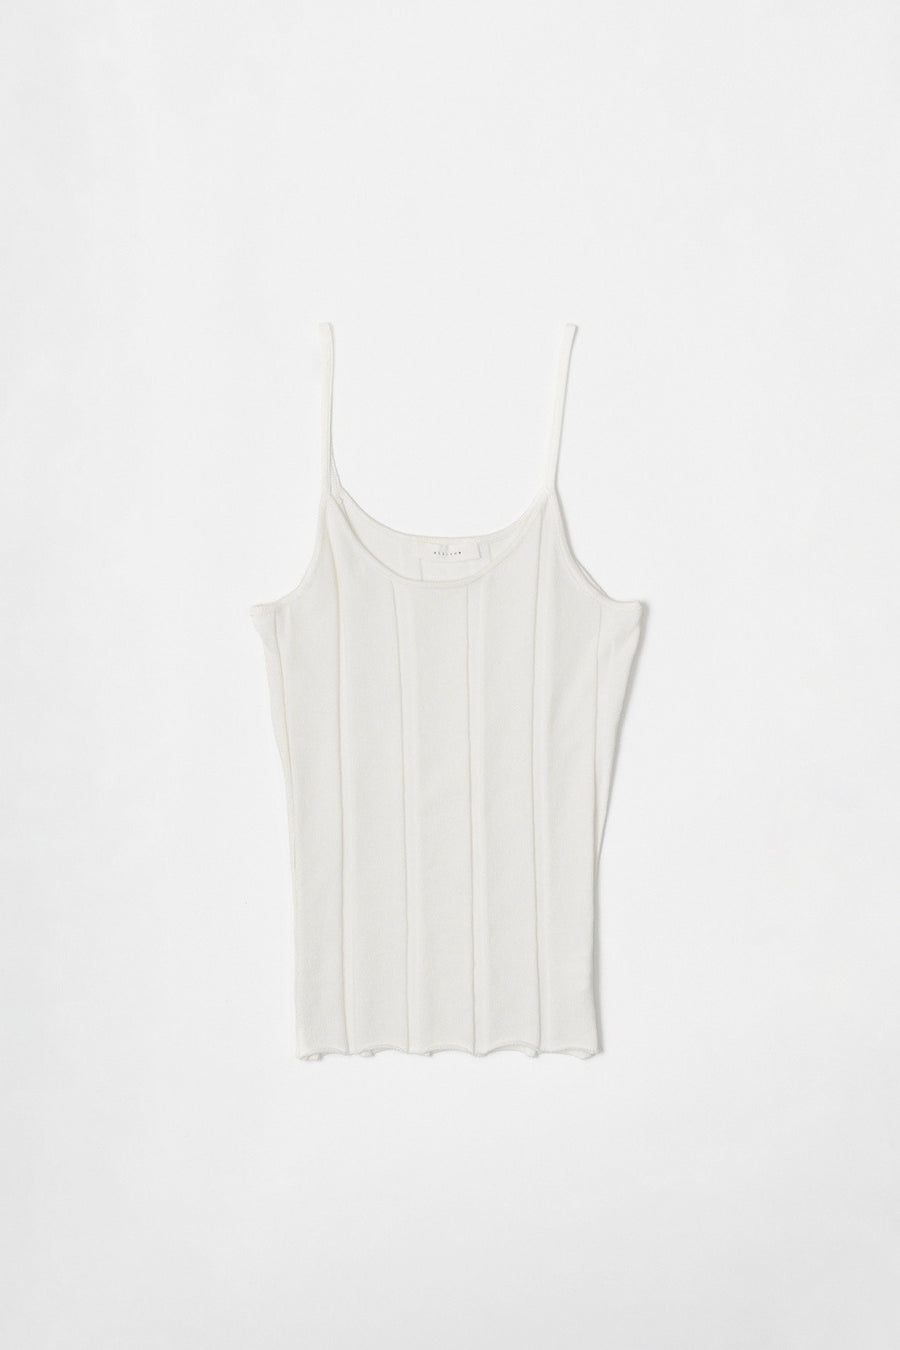 Featuring a ribbed tank top with a scoop neck and spaghetti straps.